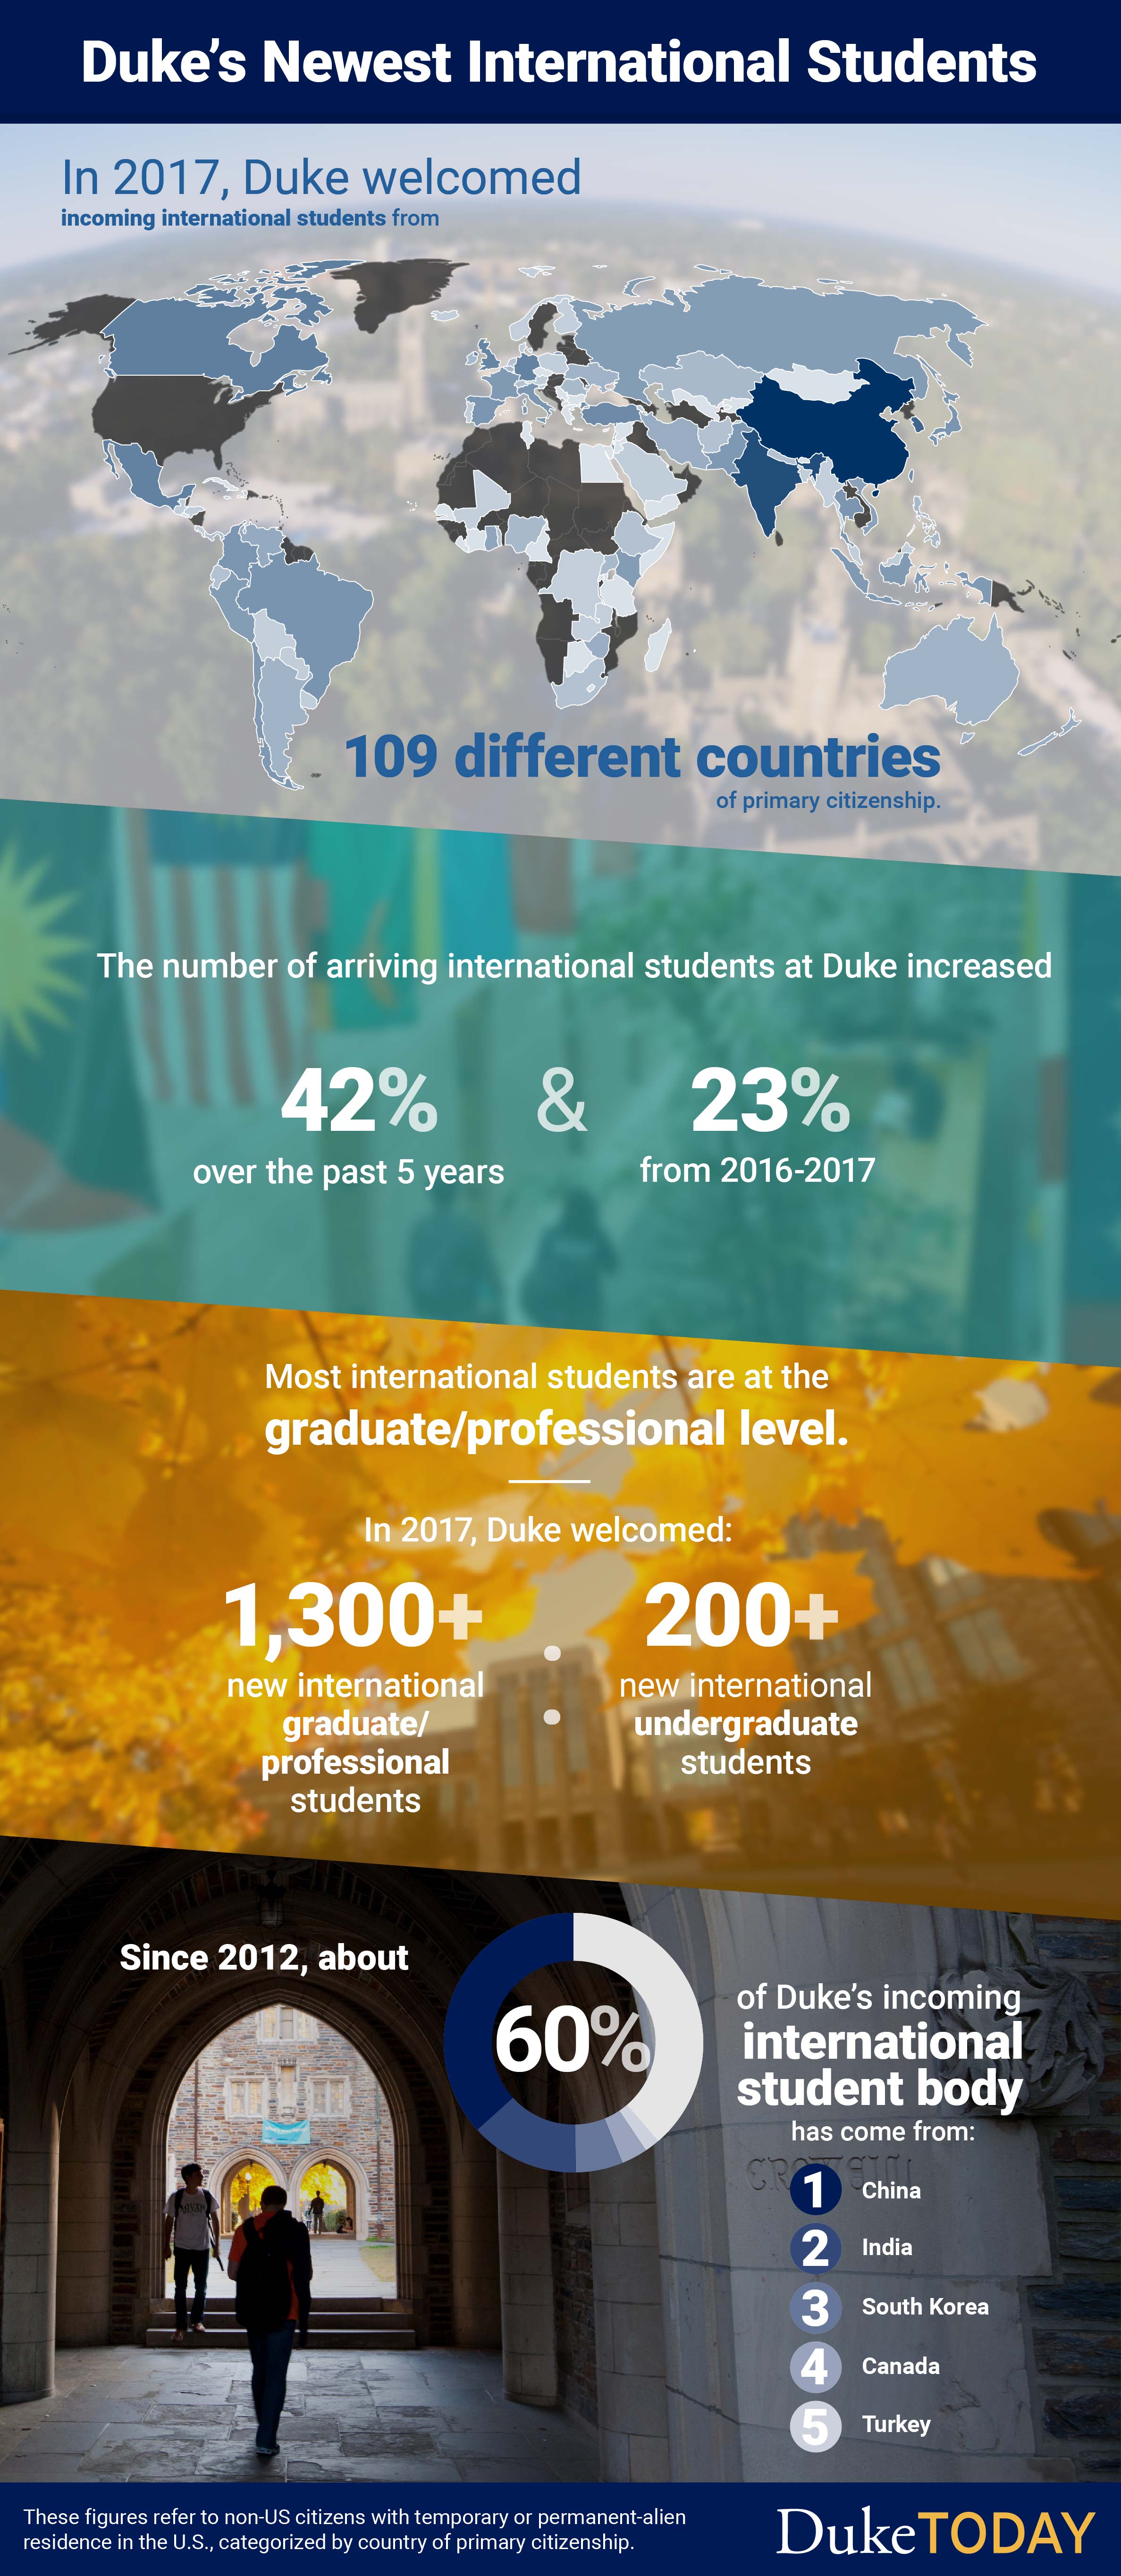 An infographic about Duke's Newest International Students: In 2017, Duke welcomed incoming international students from 109 different countries of primary citizenship. The number of arriving international students at Duke increased 42% over the past 5 years and 23% from 2016 to 2017. Most international students are at the graduate/professional level. In 2017, Duke welcomed 1,300+ new international graduate/professional students and 200+ new international undergraduate students. Since 2012, about 60% of Duke's incoming international student body has come from China, India, South Korea, Canada and Turkey (in order by percent representation in Duke's international student body). These figures refer to non-US citizens with temporary or permanent-alien residence in the U.S., categorized by country of primary citizenship.